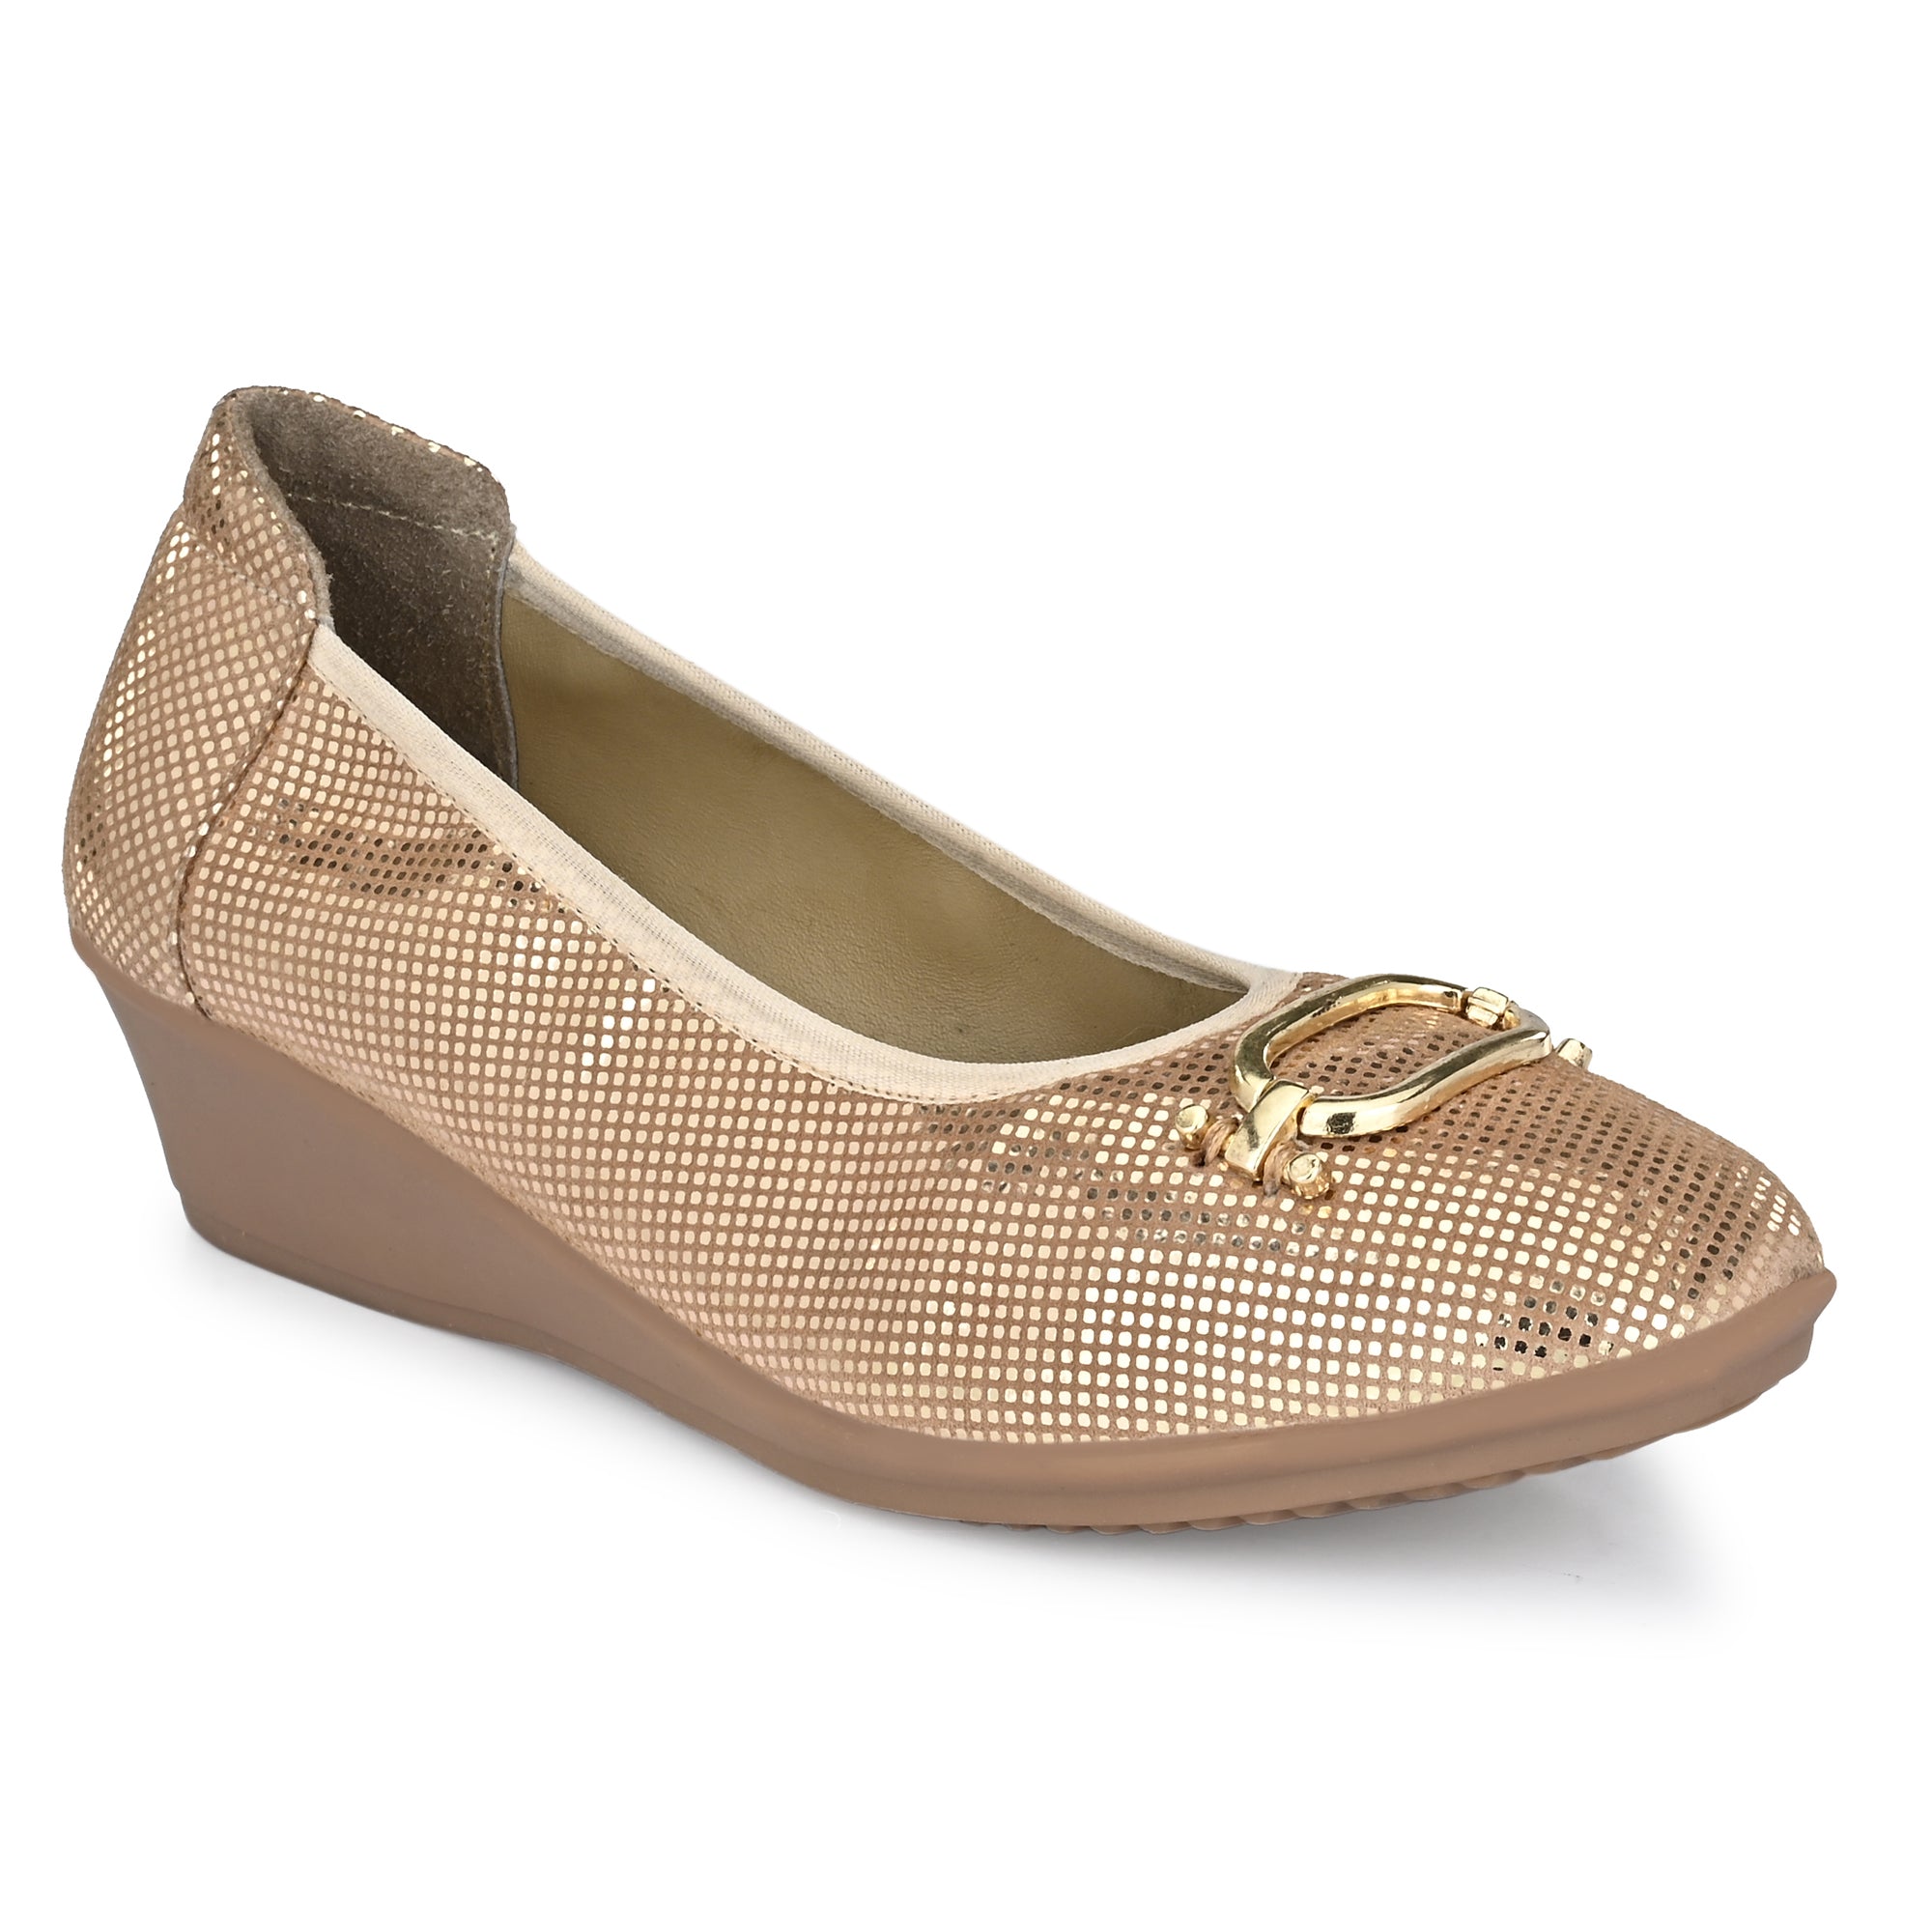 W-HR-AALIA-11 WOMEN LEATHER GOLD CASUAL PARTY SLIP ON